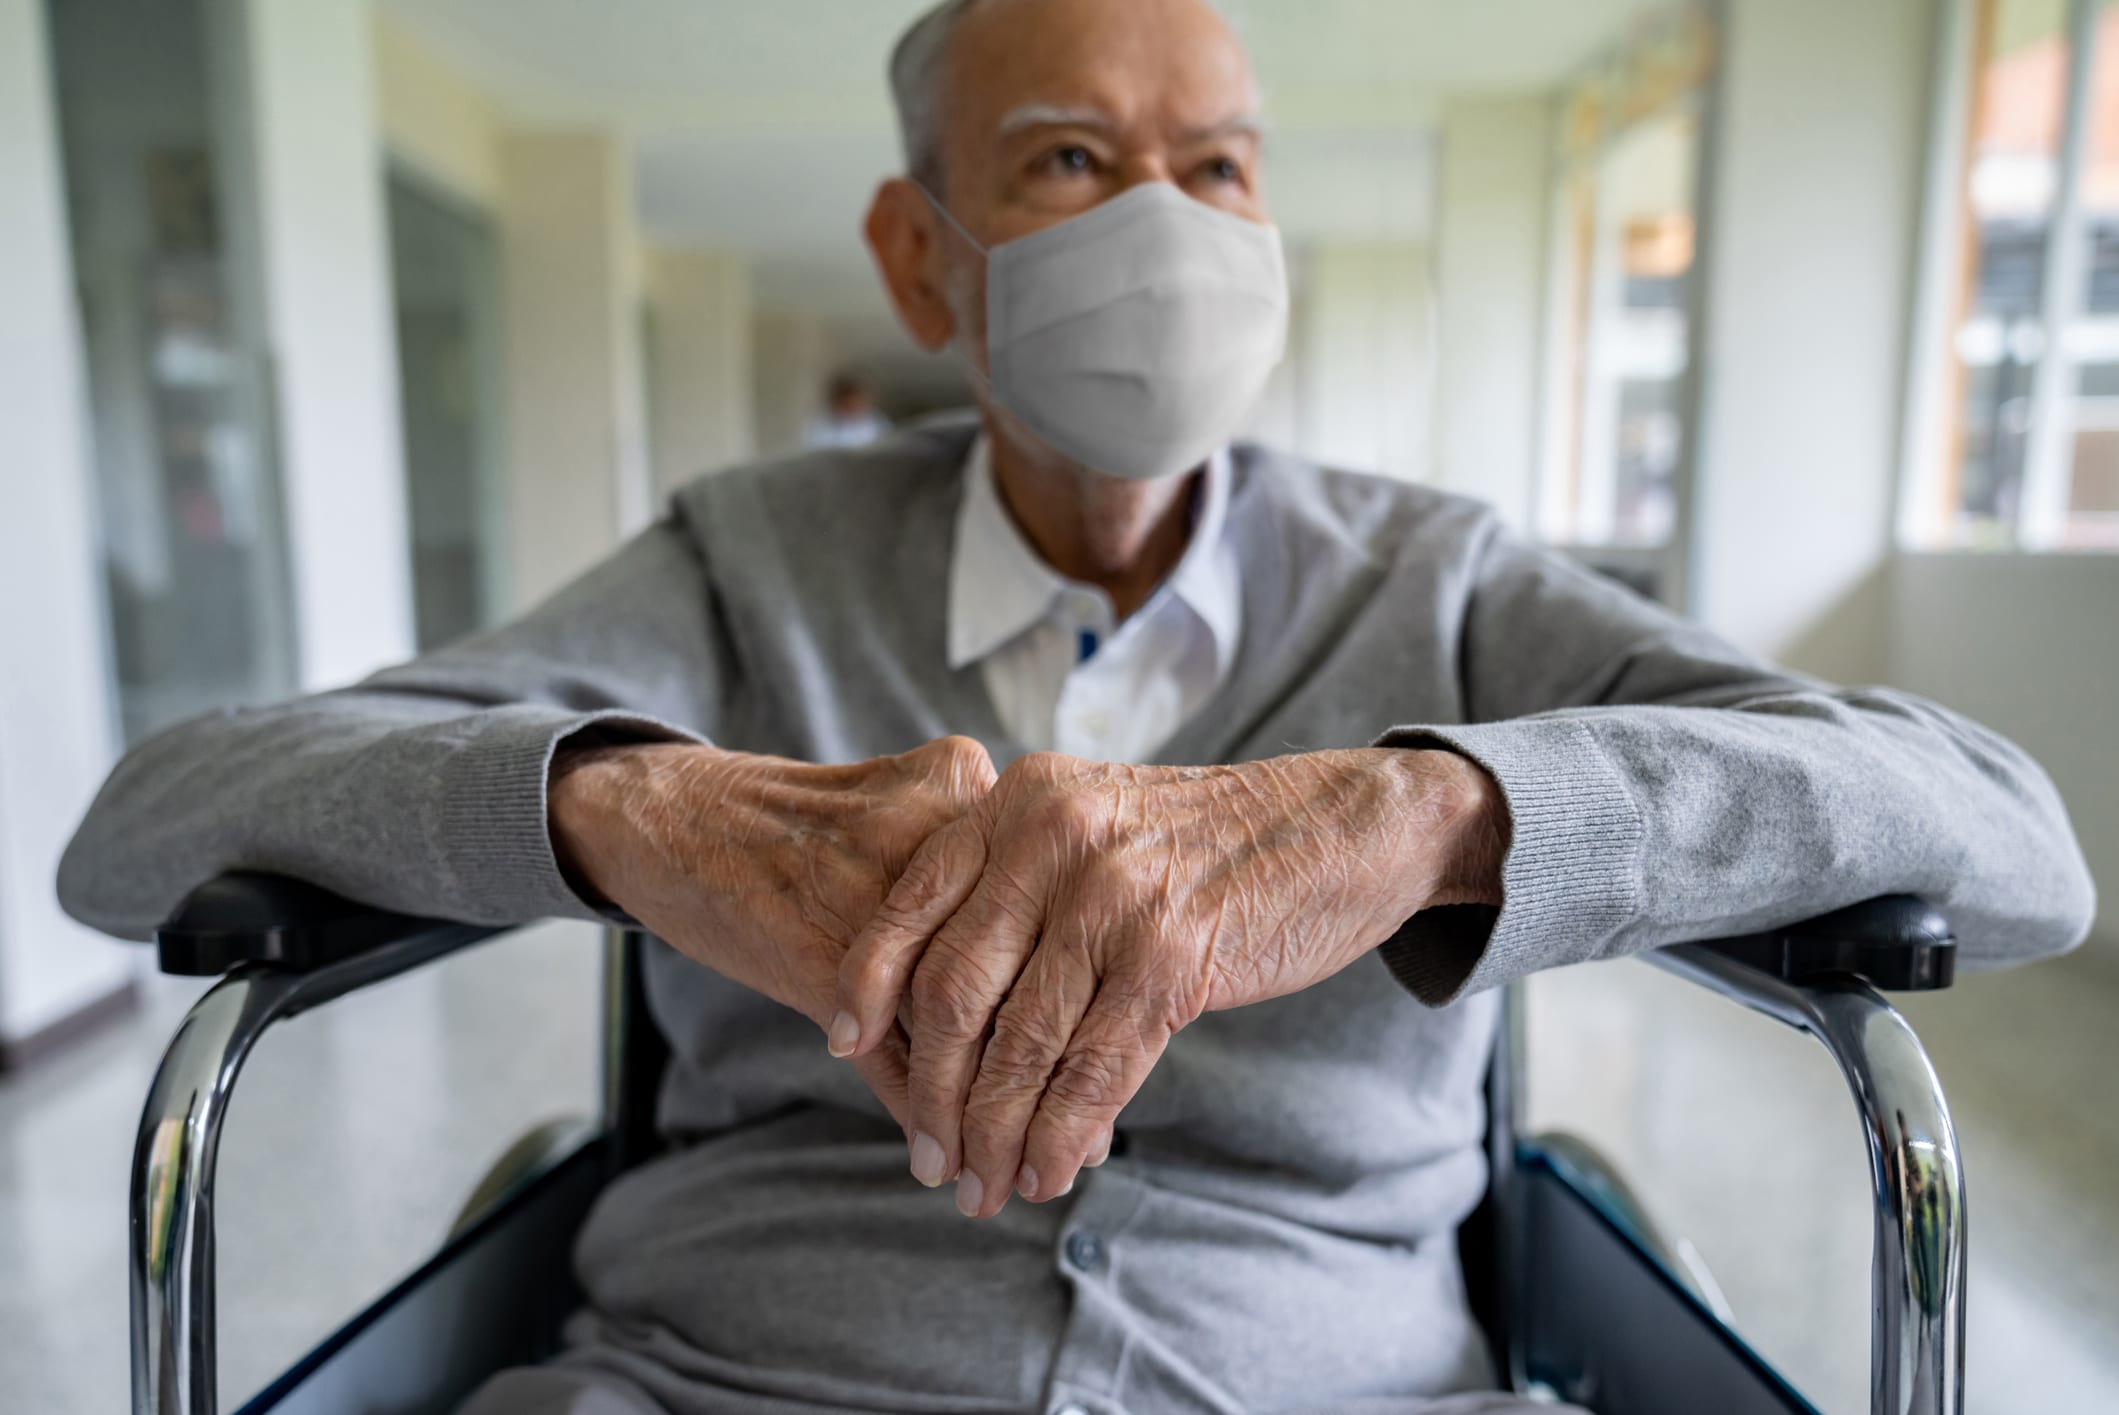 Senior adult in a wheelchair at the hospital wearing a facemask